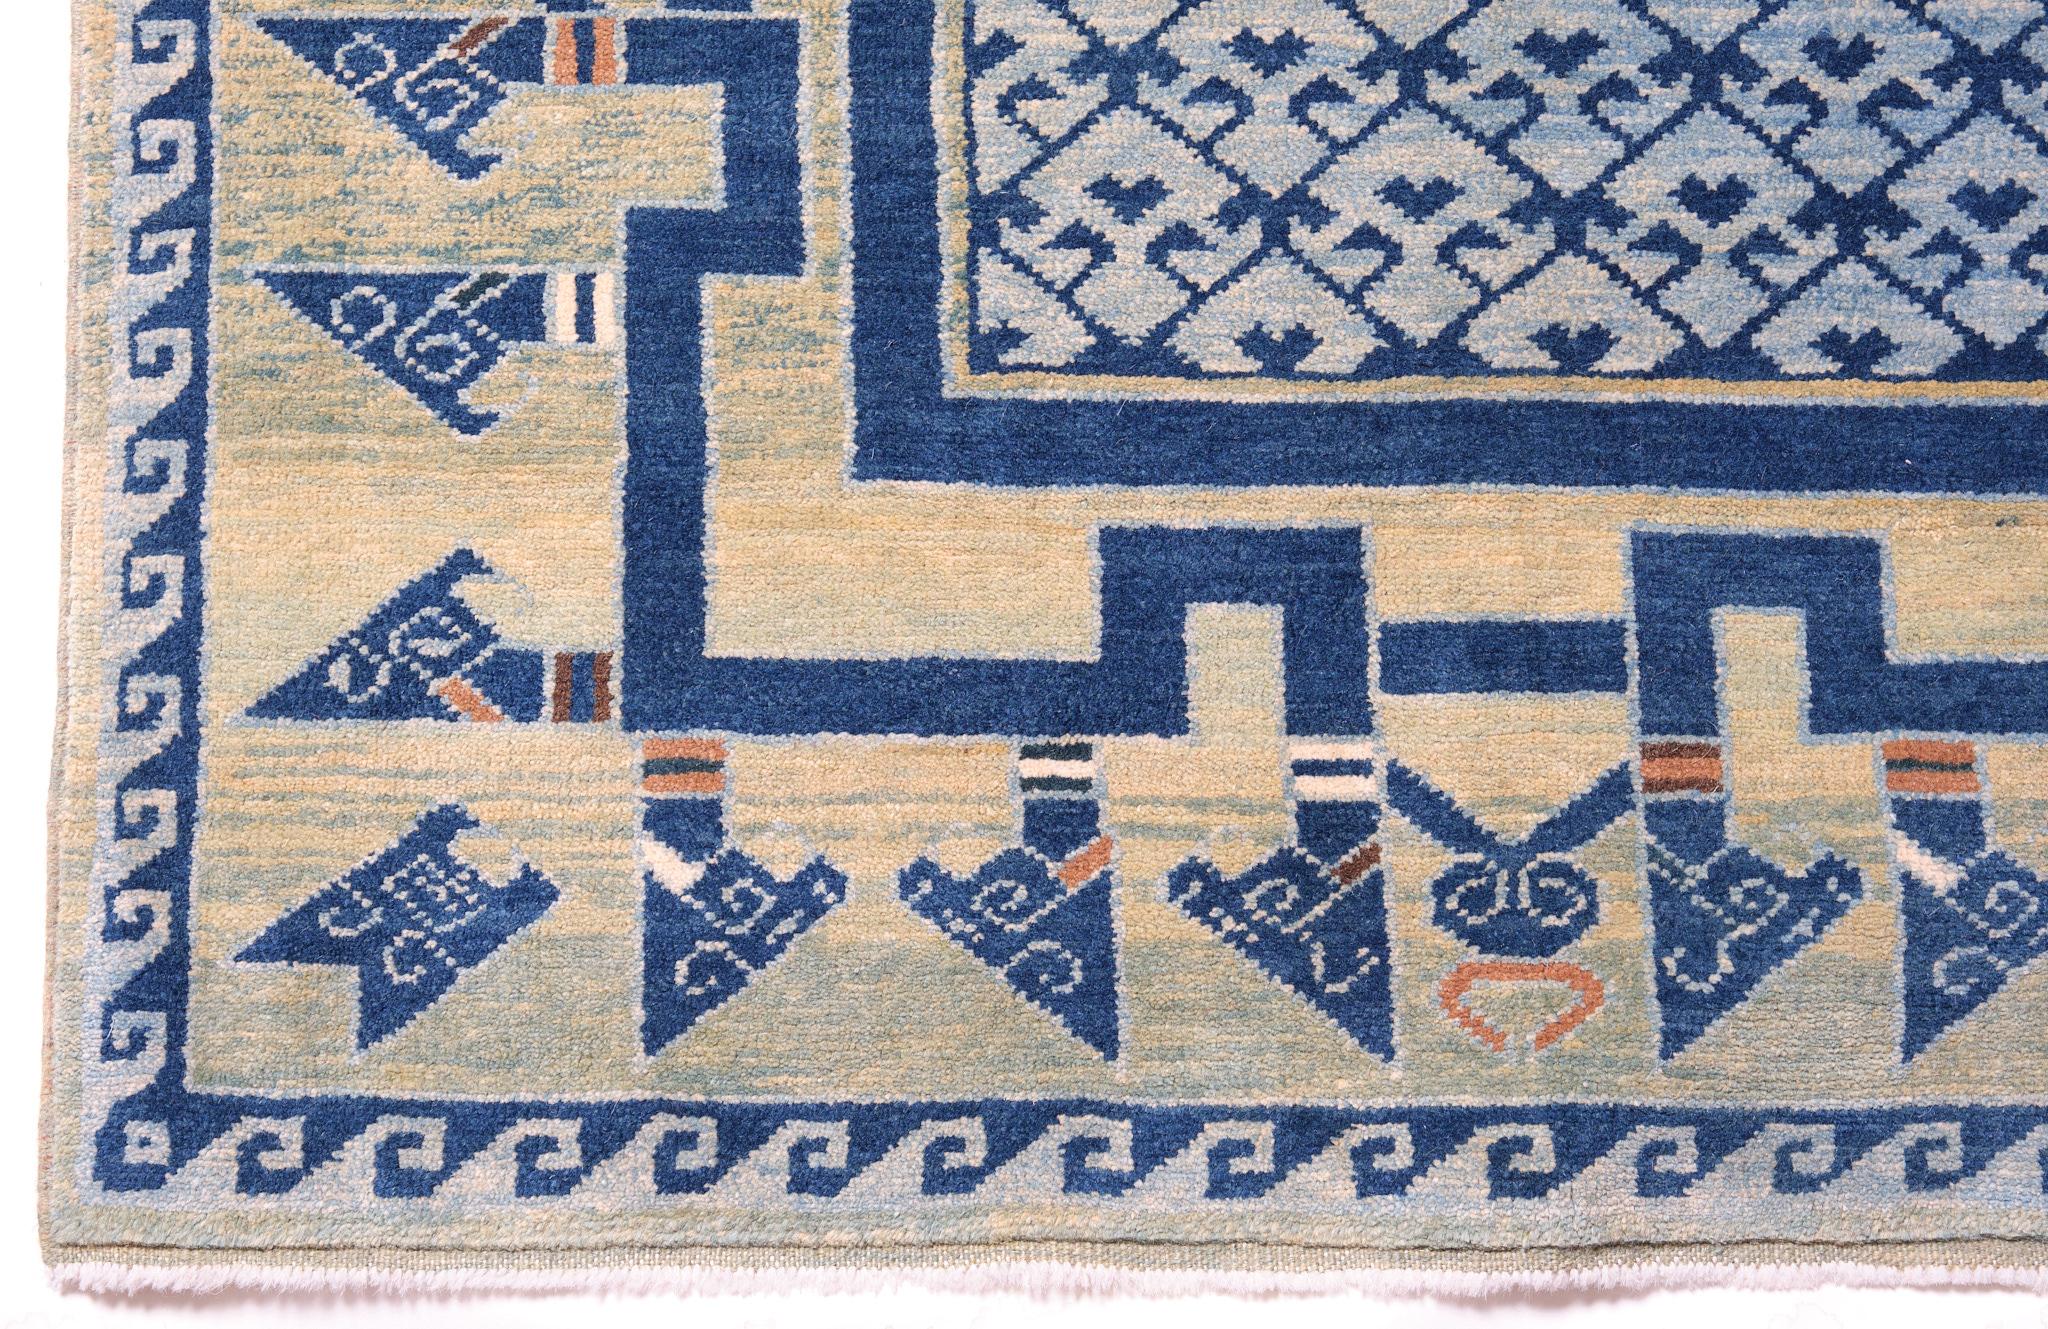 The source of the carpet comes from the book Orient Stars Collection, Anatolian Tribal Rugs 1050-1750, Michael Franses, Hali Publications Ltd, 2021 fig.21. This 13th century carpet is from probably the Konya region, central Anatolia, circa 1200-1300